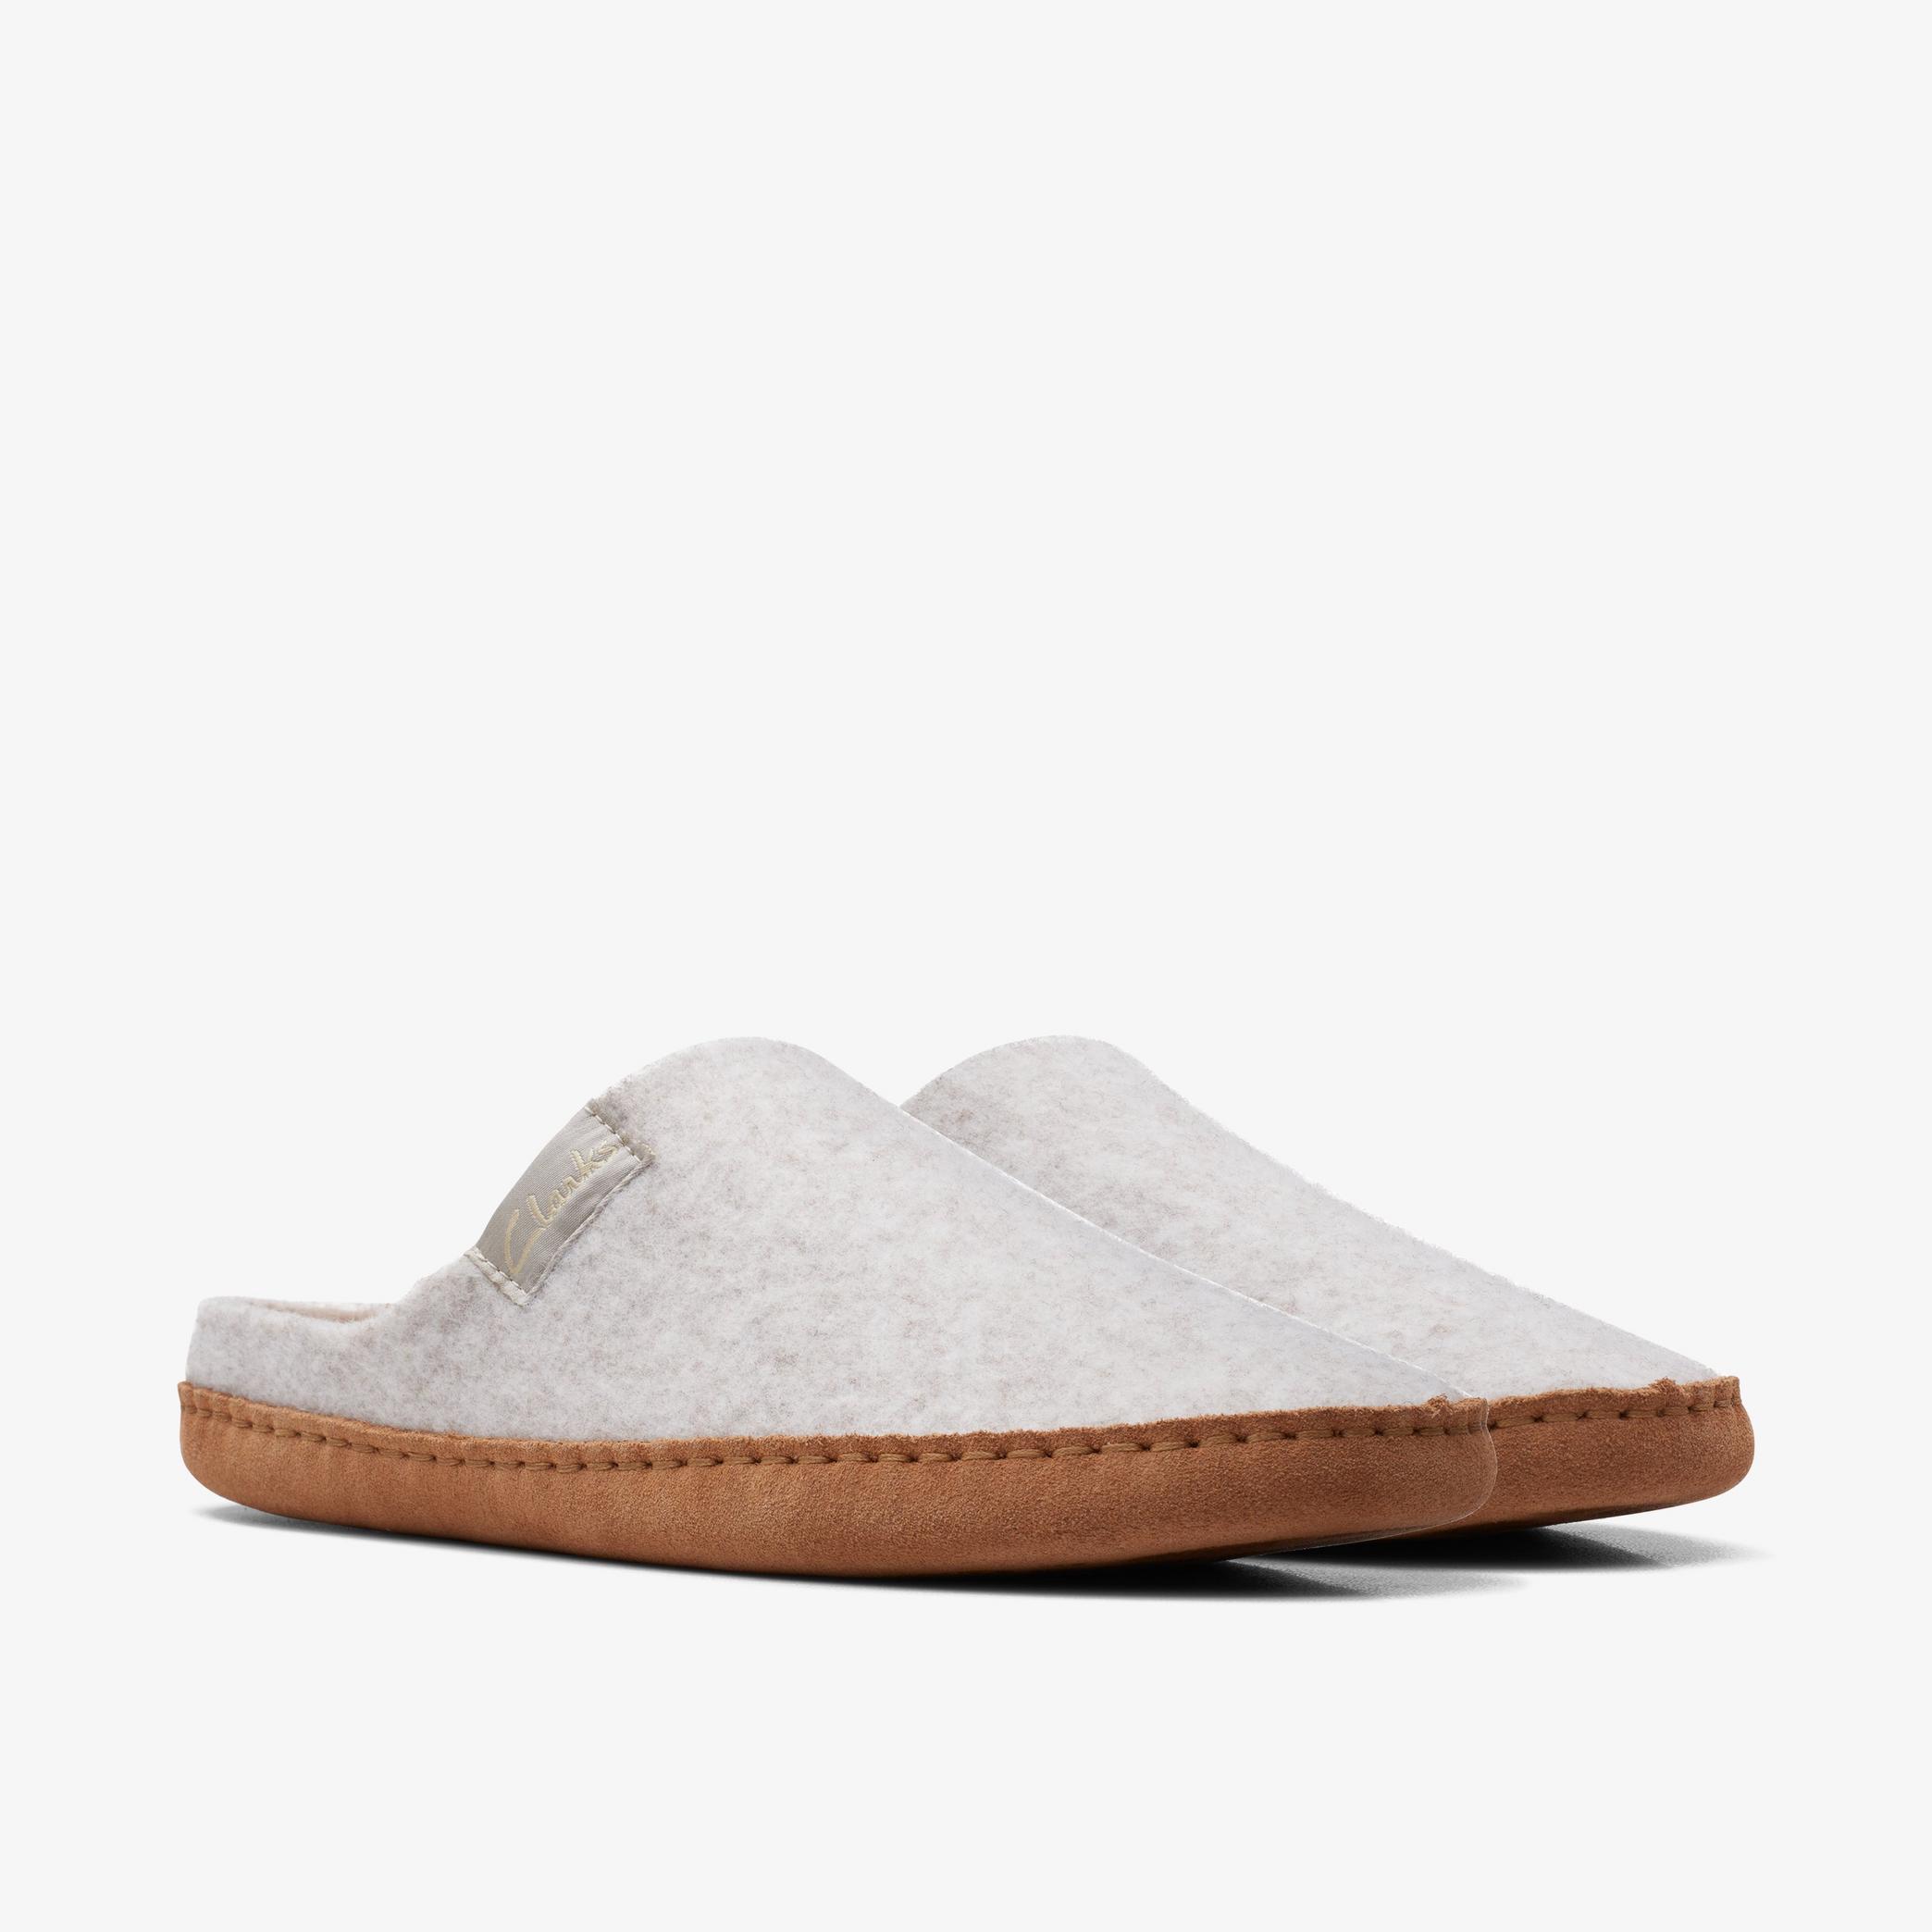 Clarks Origin H Oatmeal Slippers, view 4 of 5